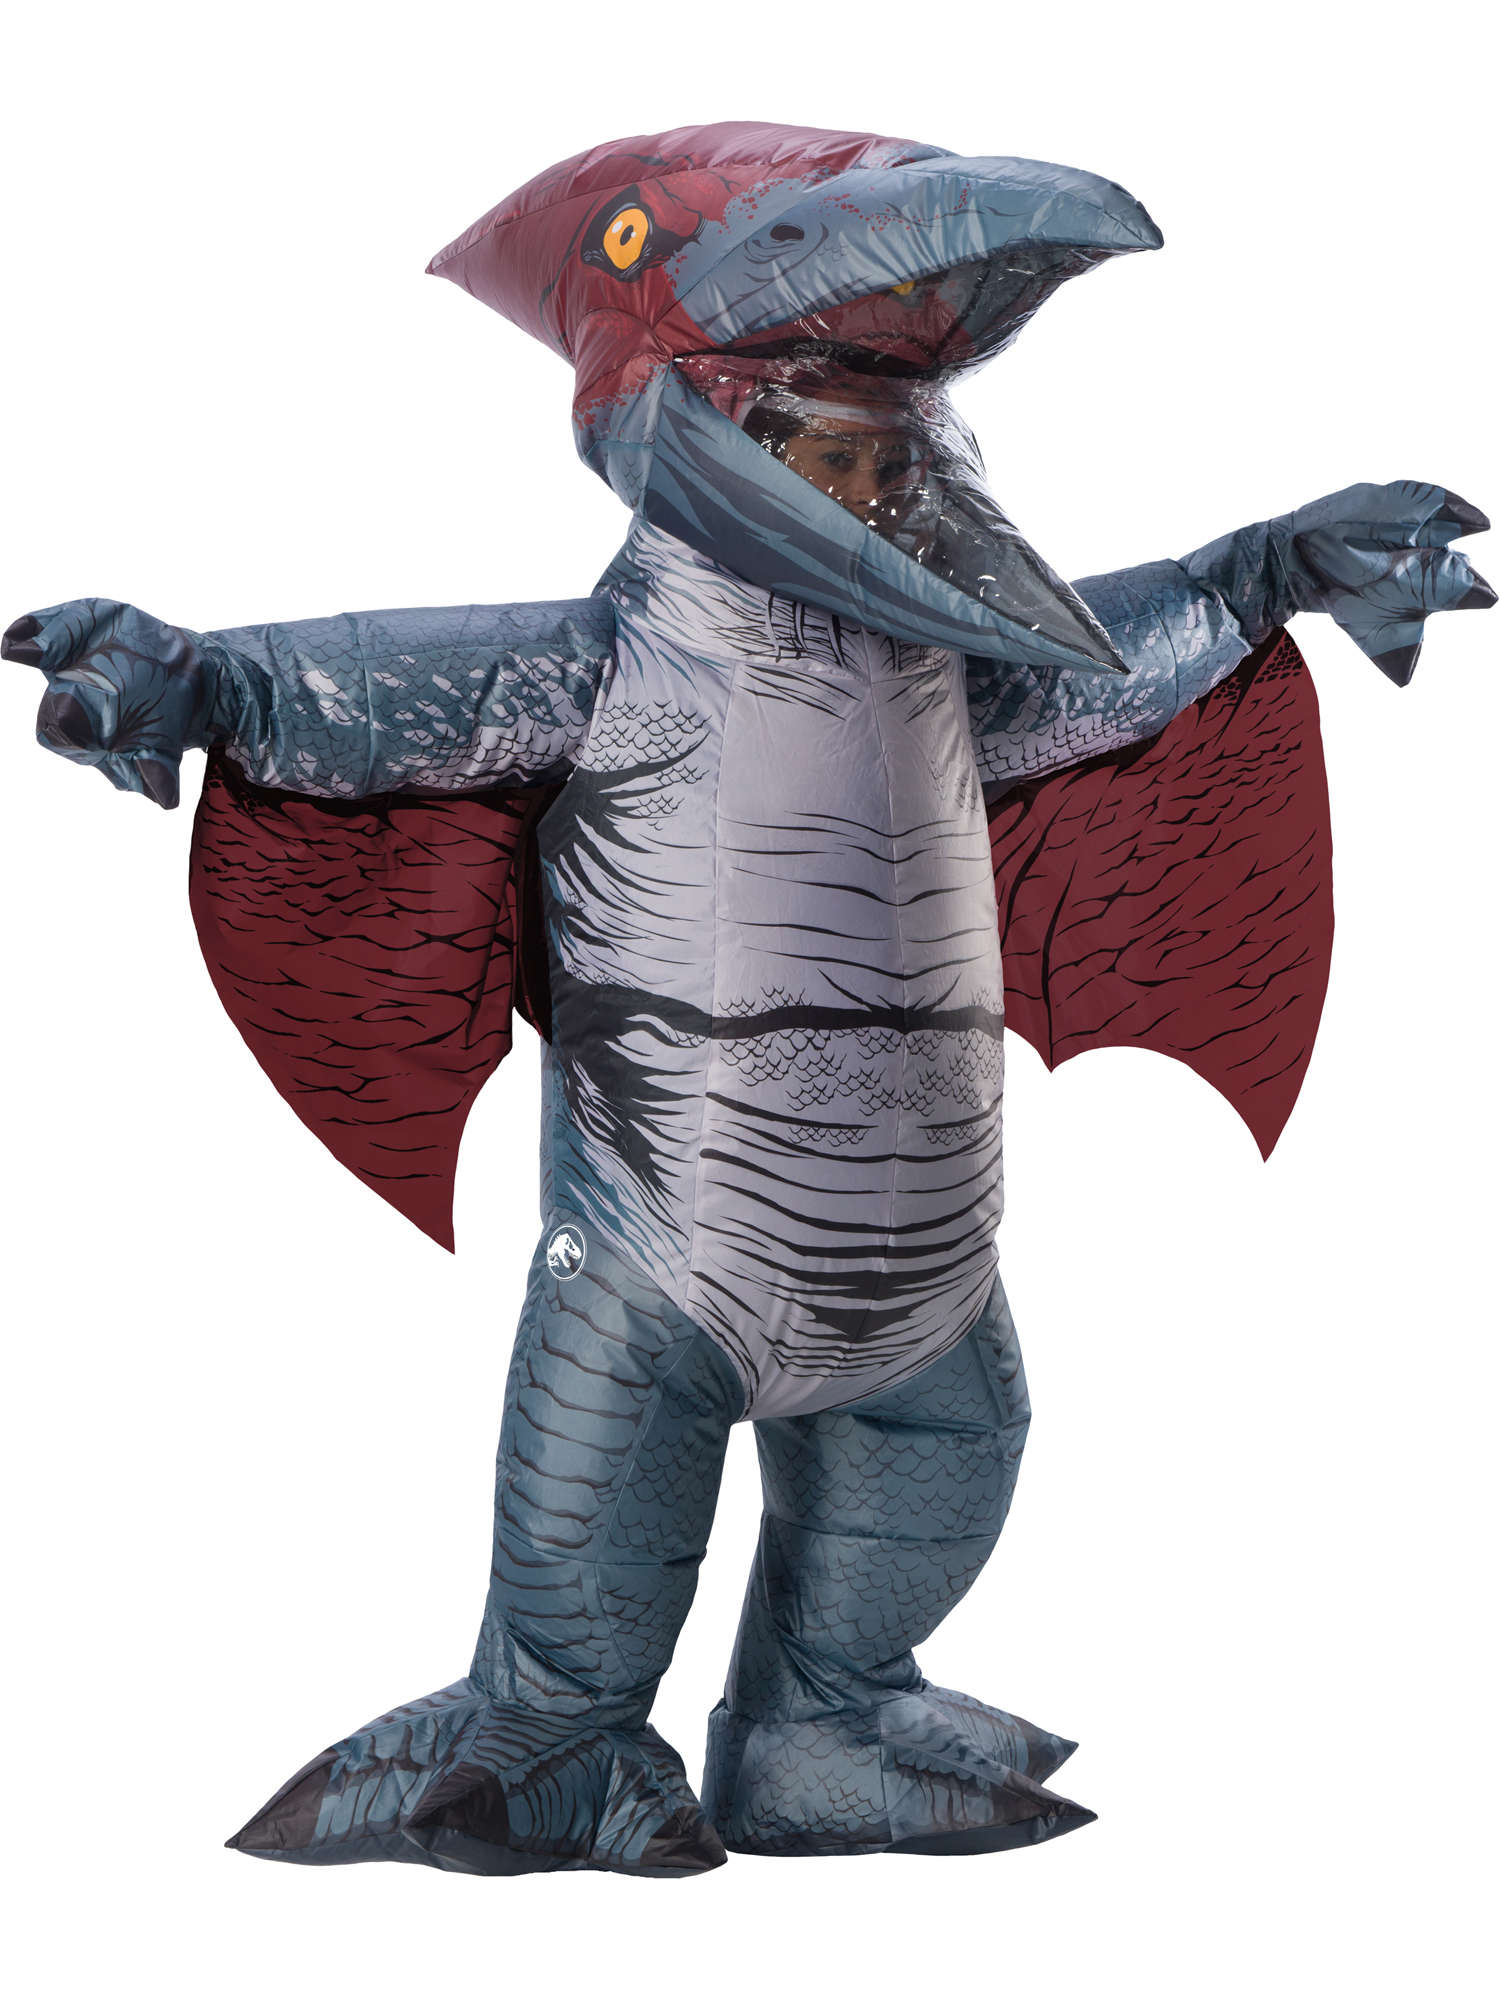 Pteranodon, Multi, Jurassic World, Adult Costume, One Size, Front